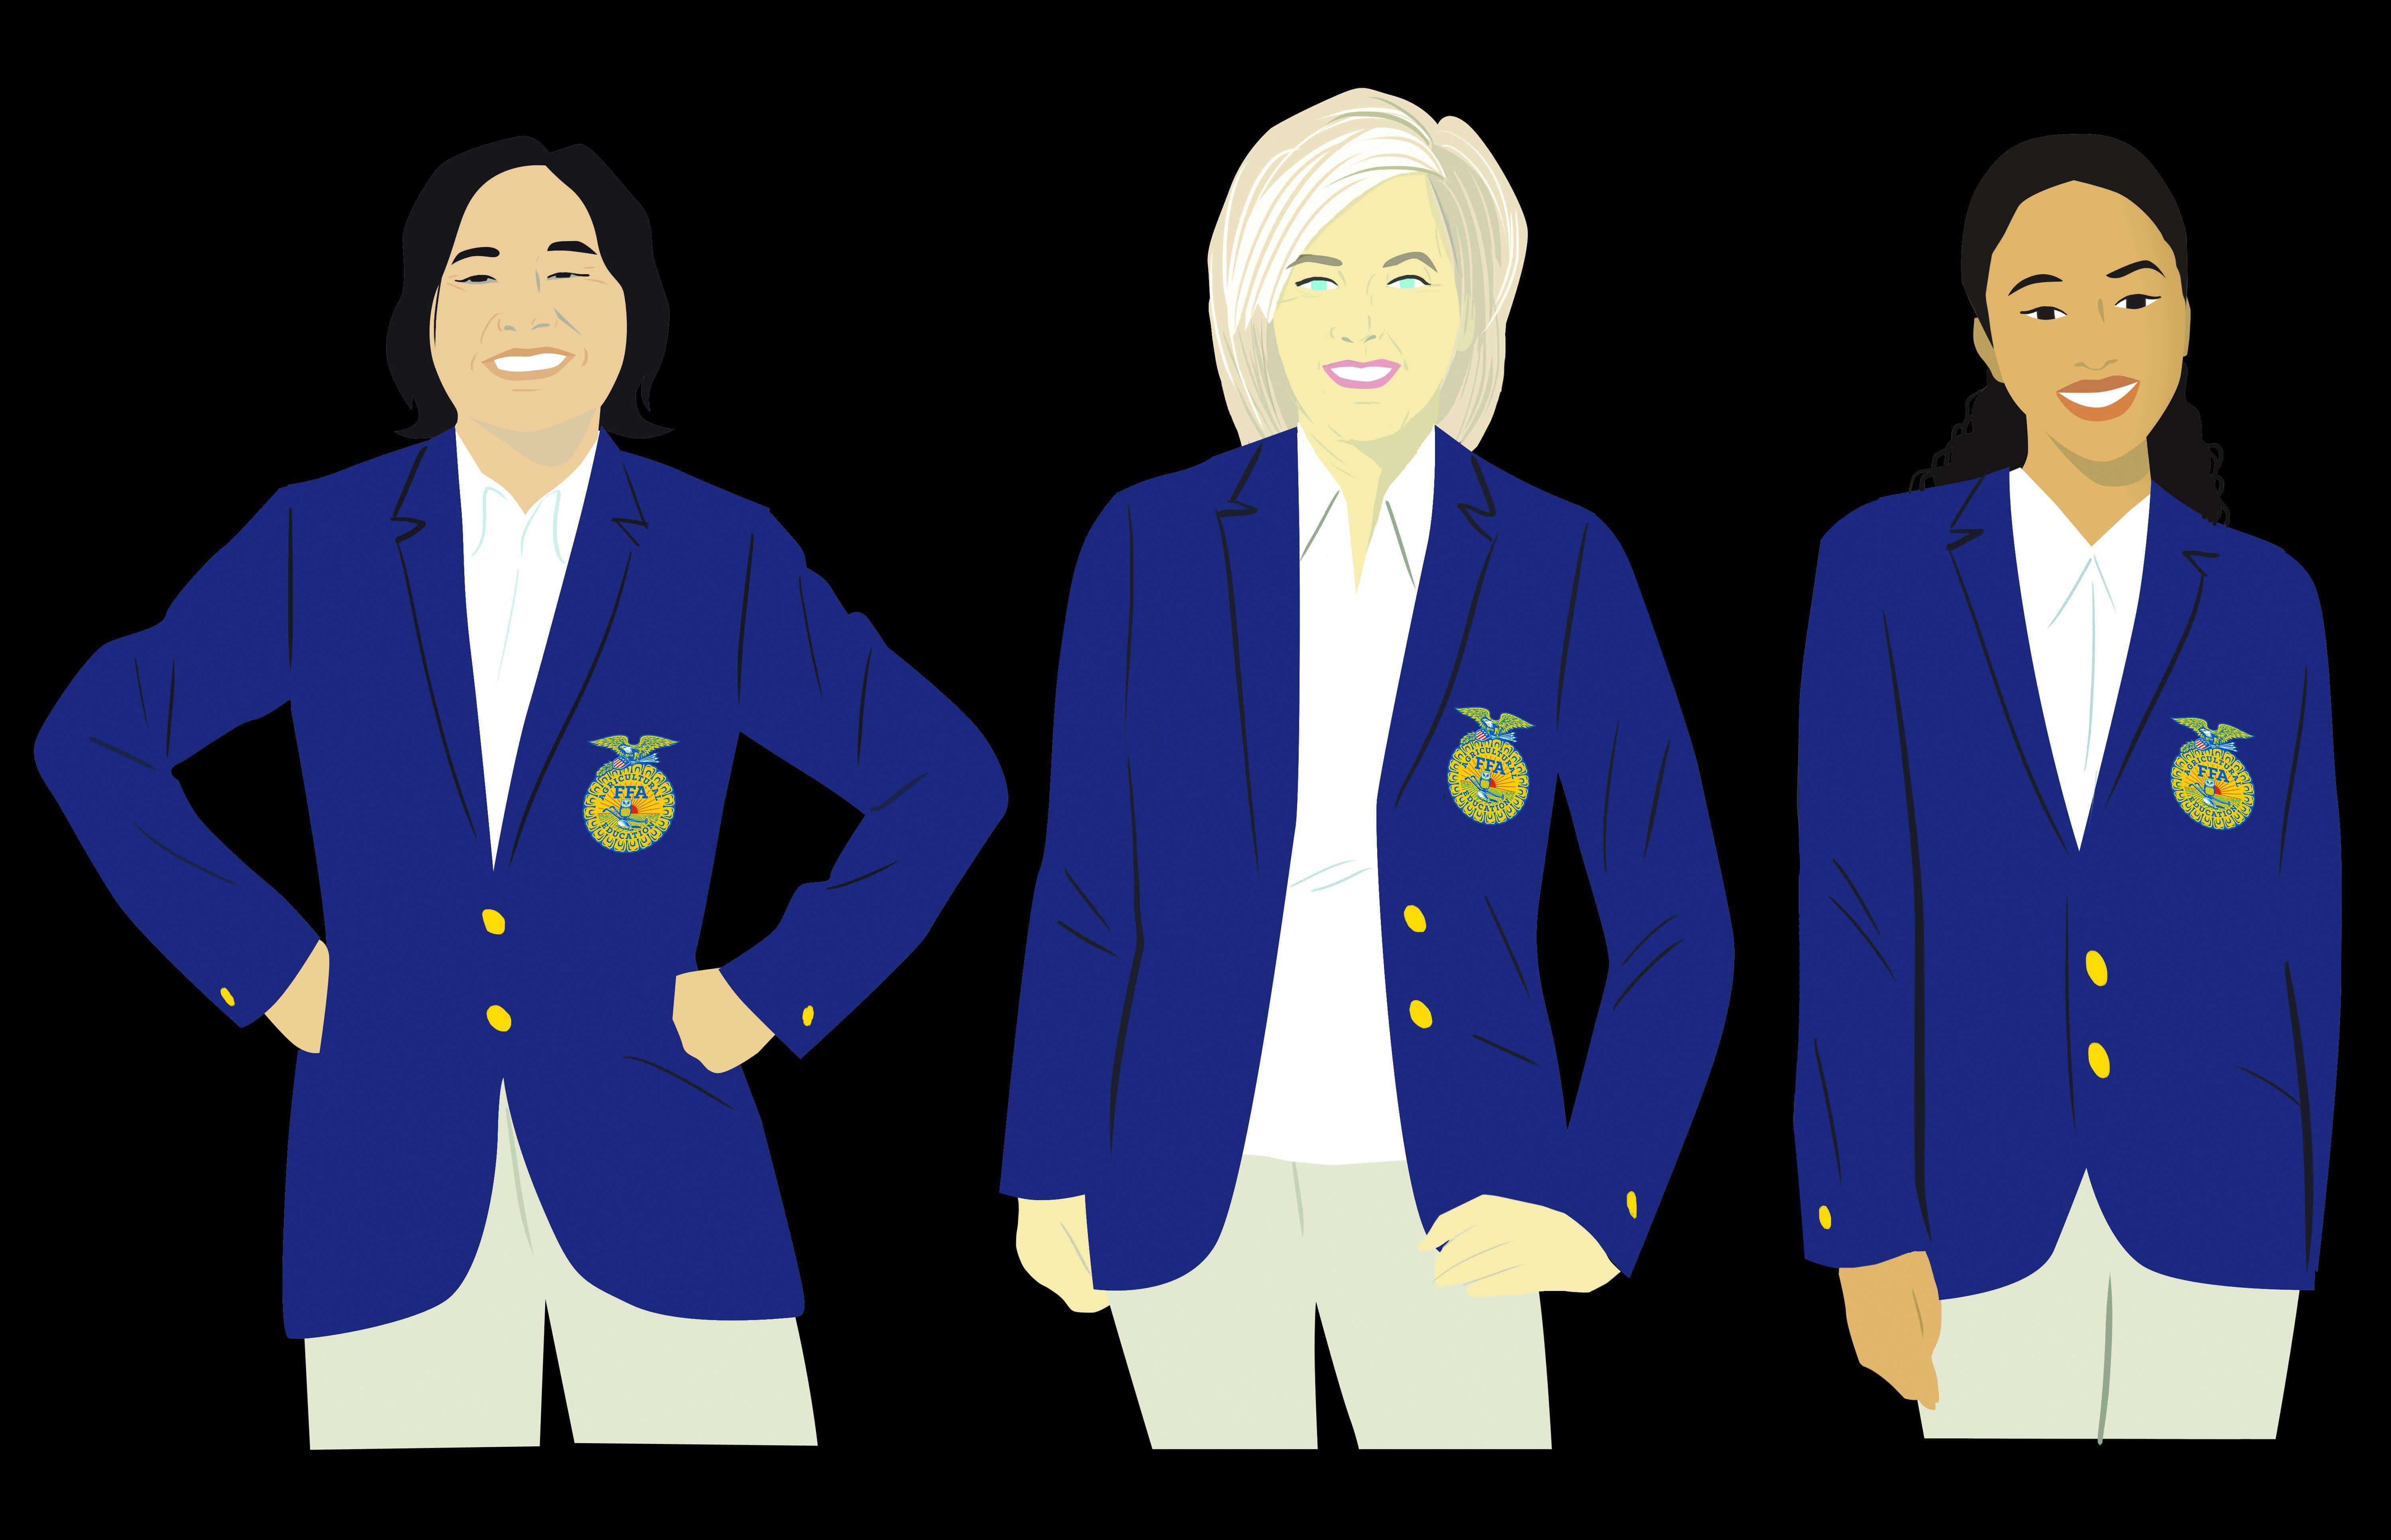 Does That College Have an FFA Chapter? - National FFA Organization